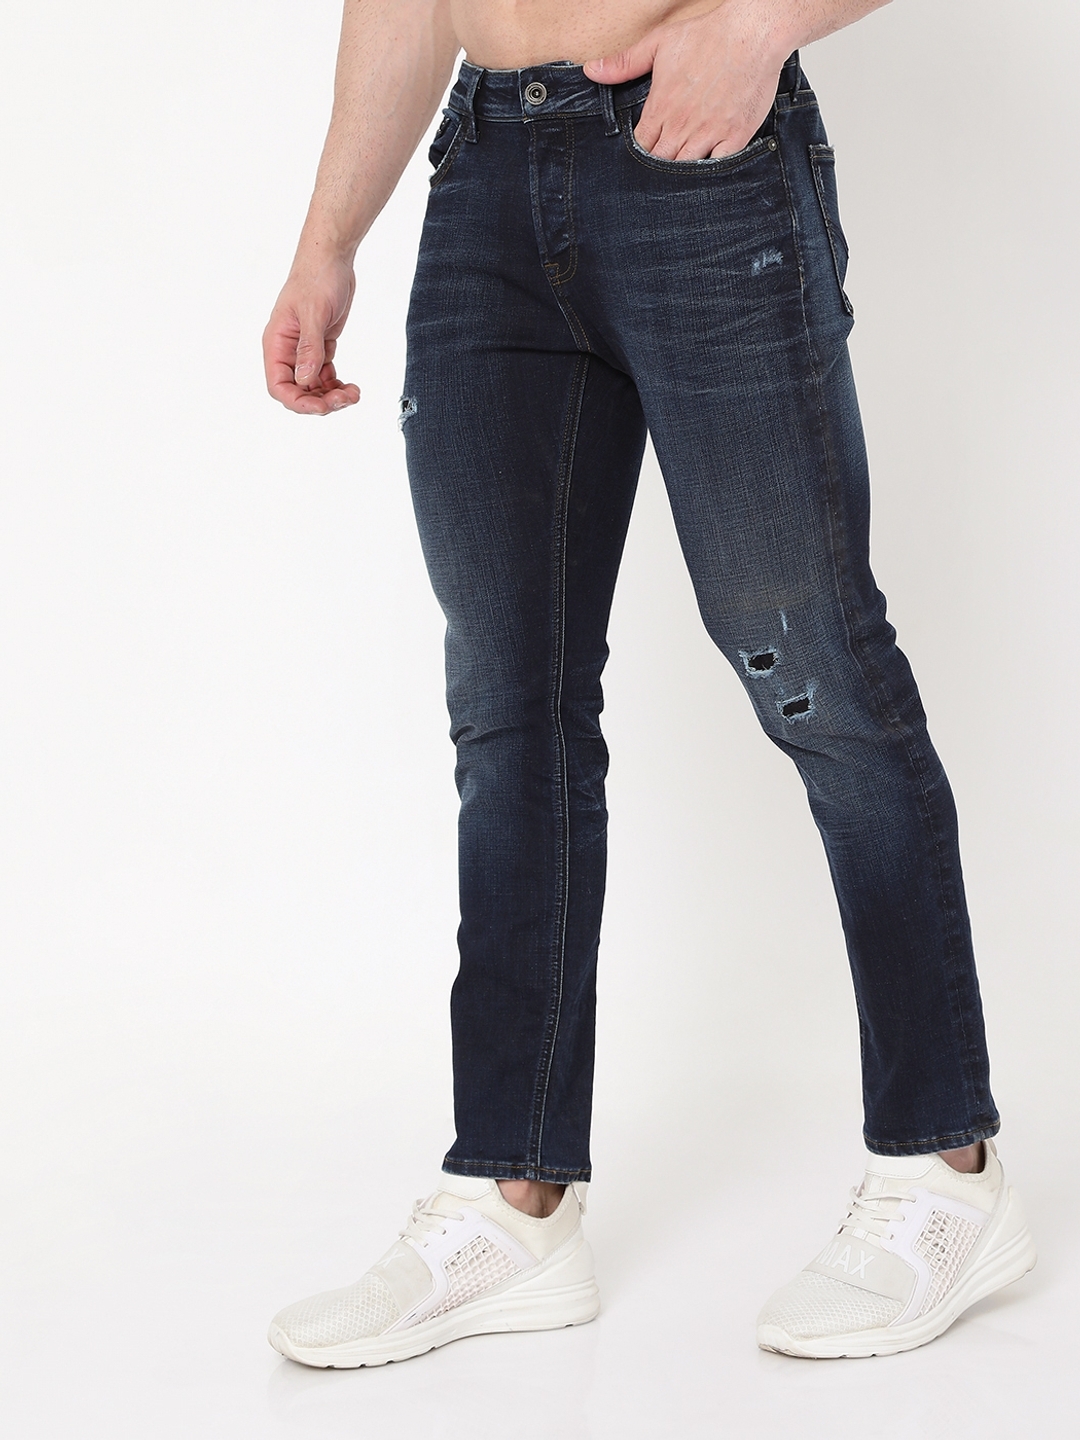 Men's E-motion Norton Carrot Tapered Fit Jeans